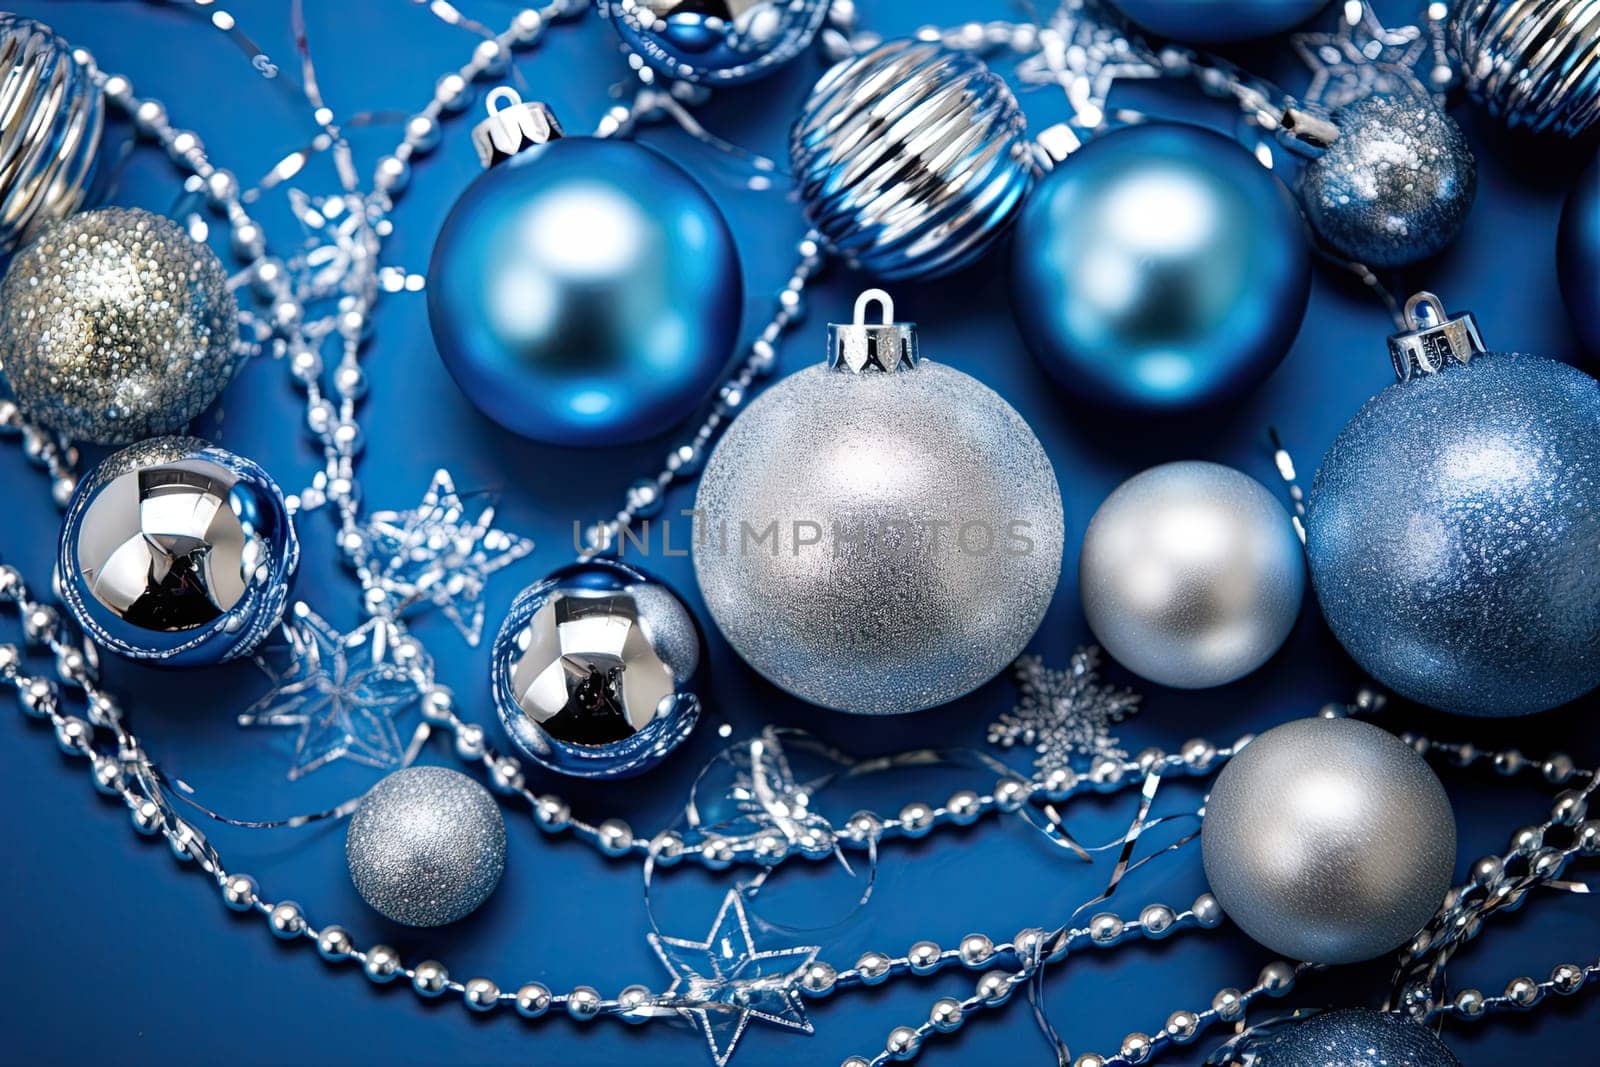 A Festive Collection of Blue and Silver Christmas Ornaments